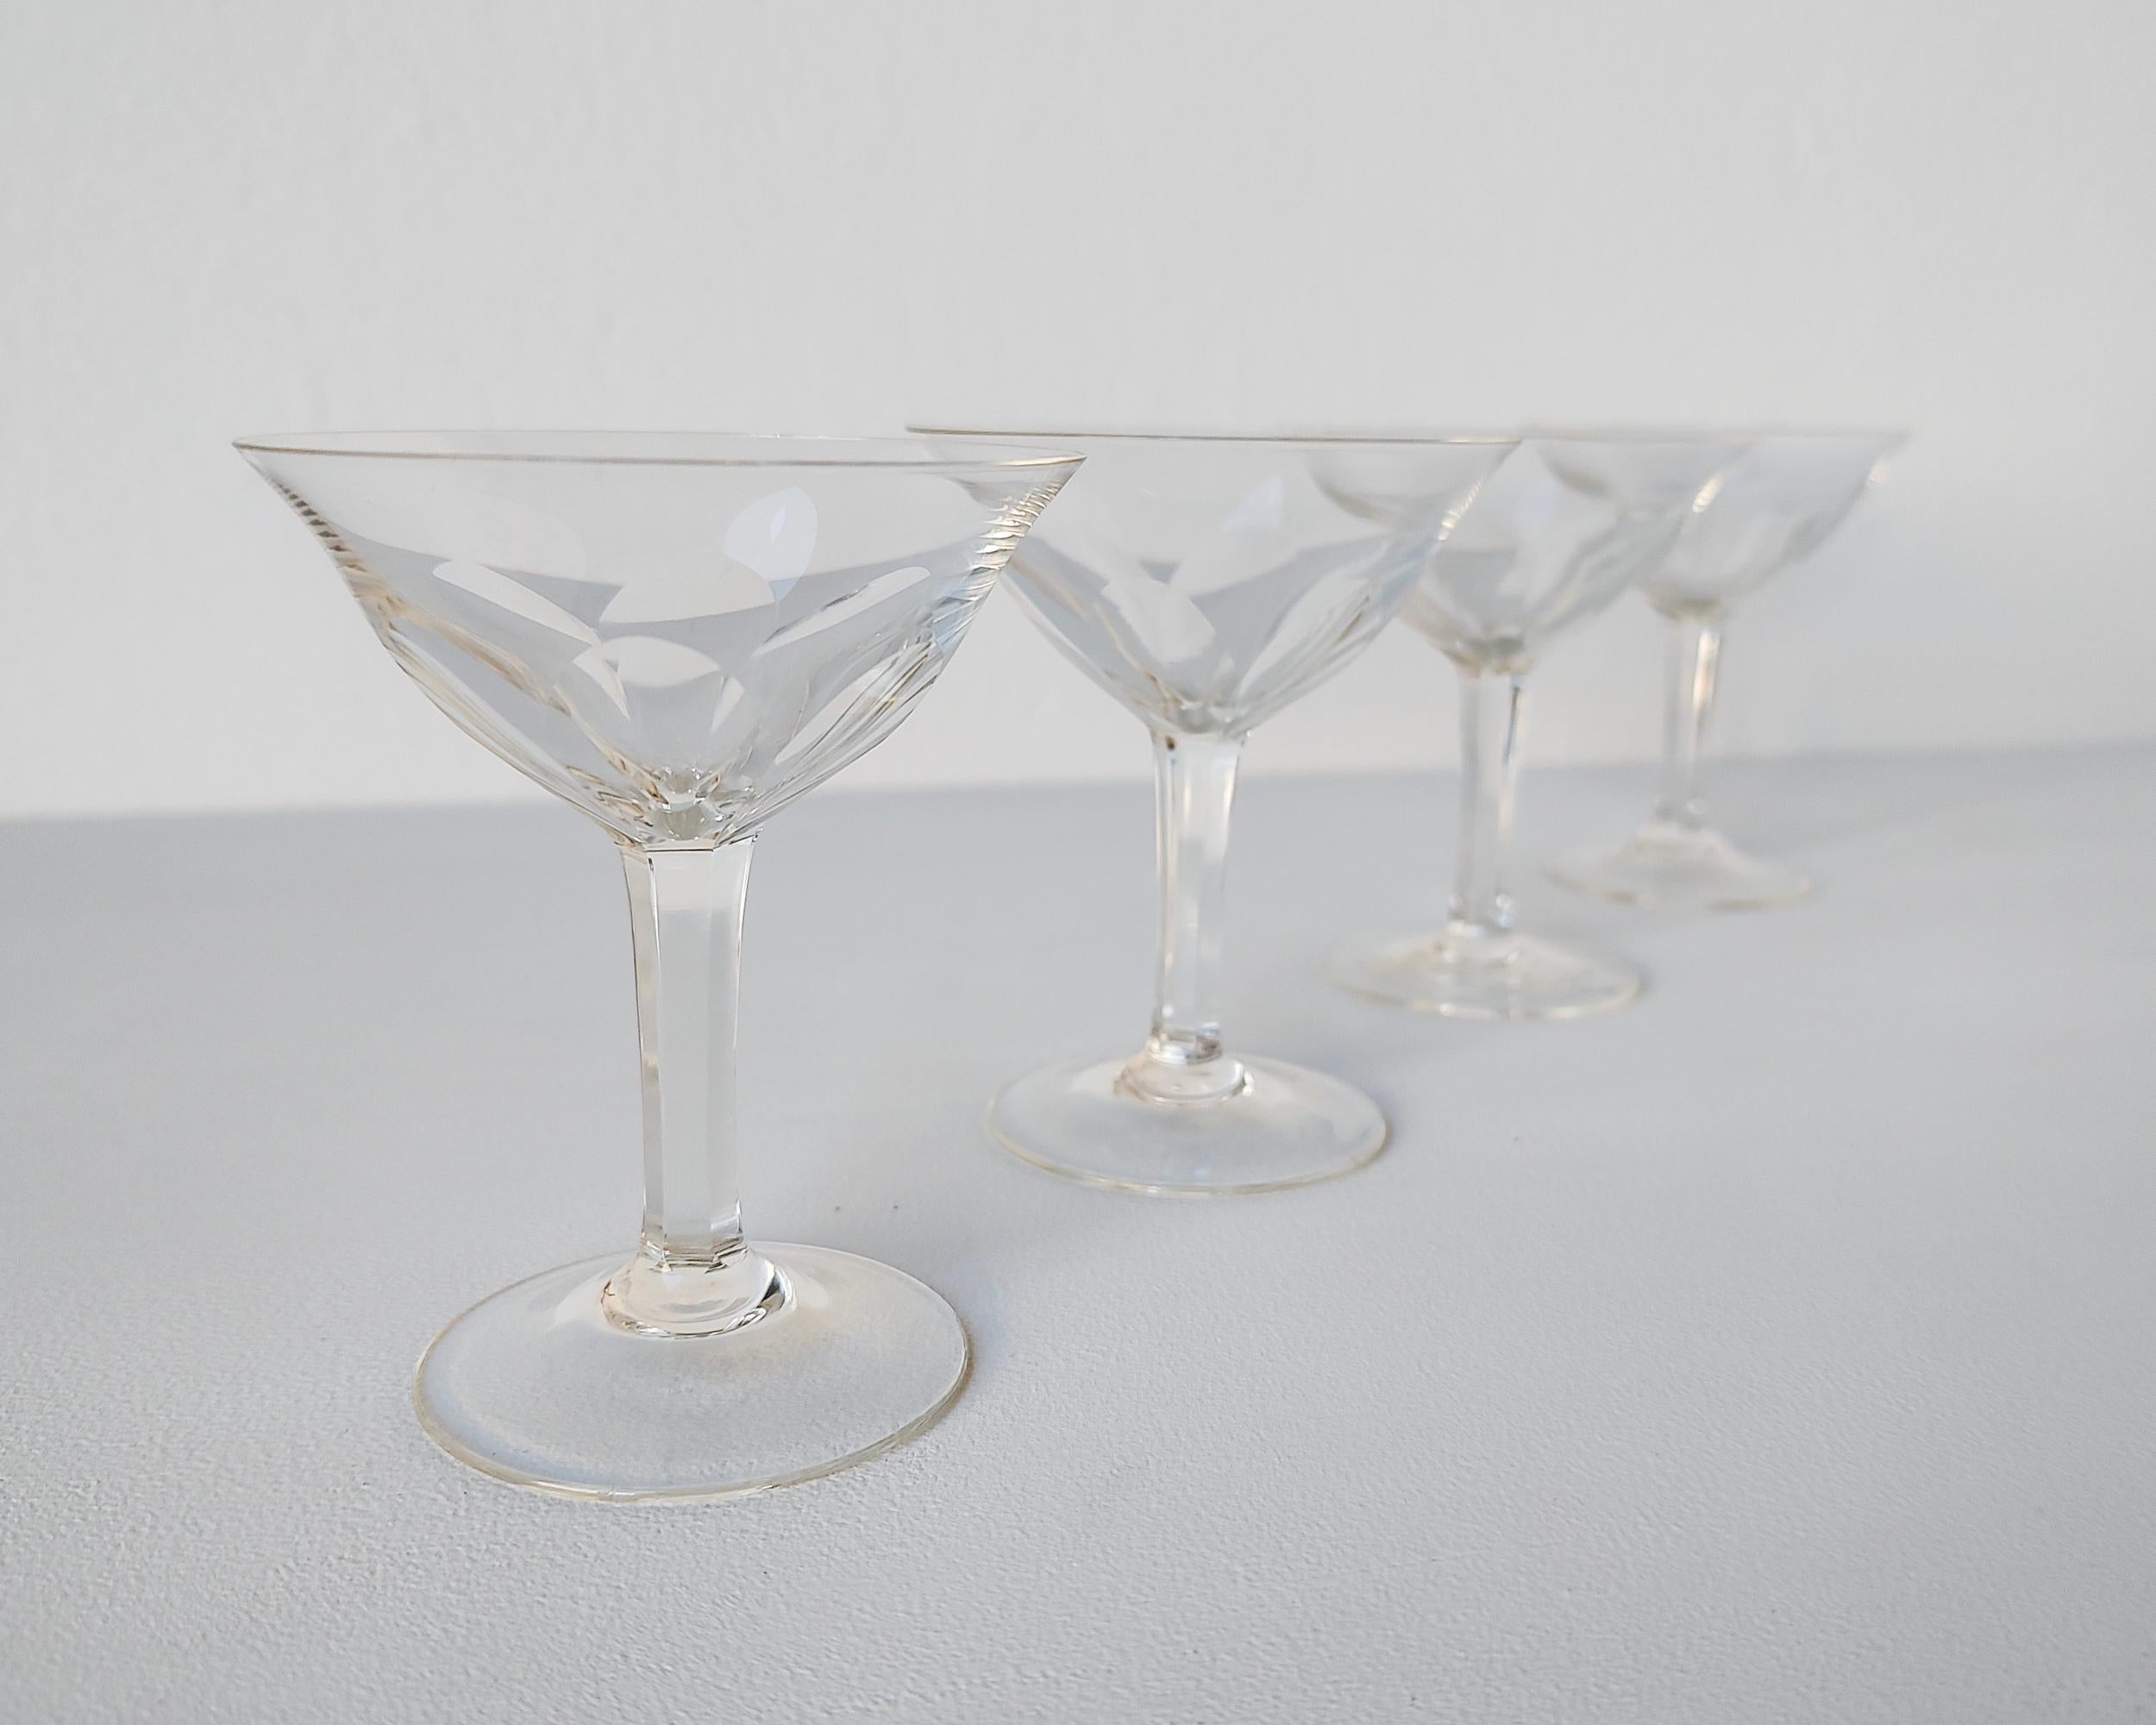 Set of 4 Faceted Gevaert Stemmed Cordial Glasses in the style of Val St Lambert In Excellent Condition For Sale In Hawthorne, CA